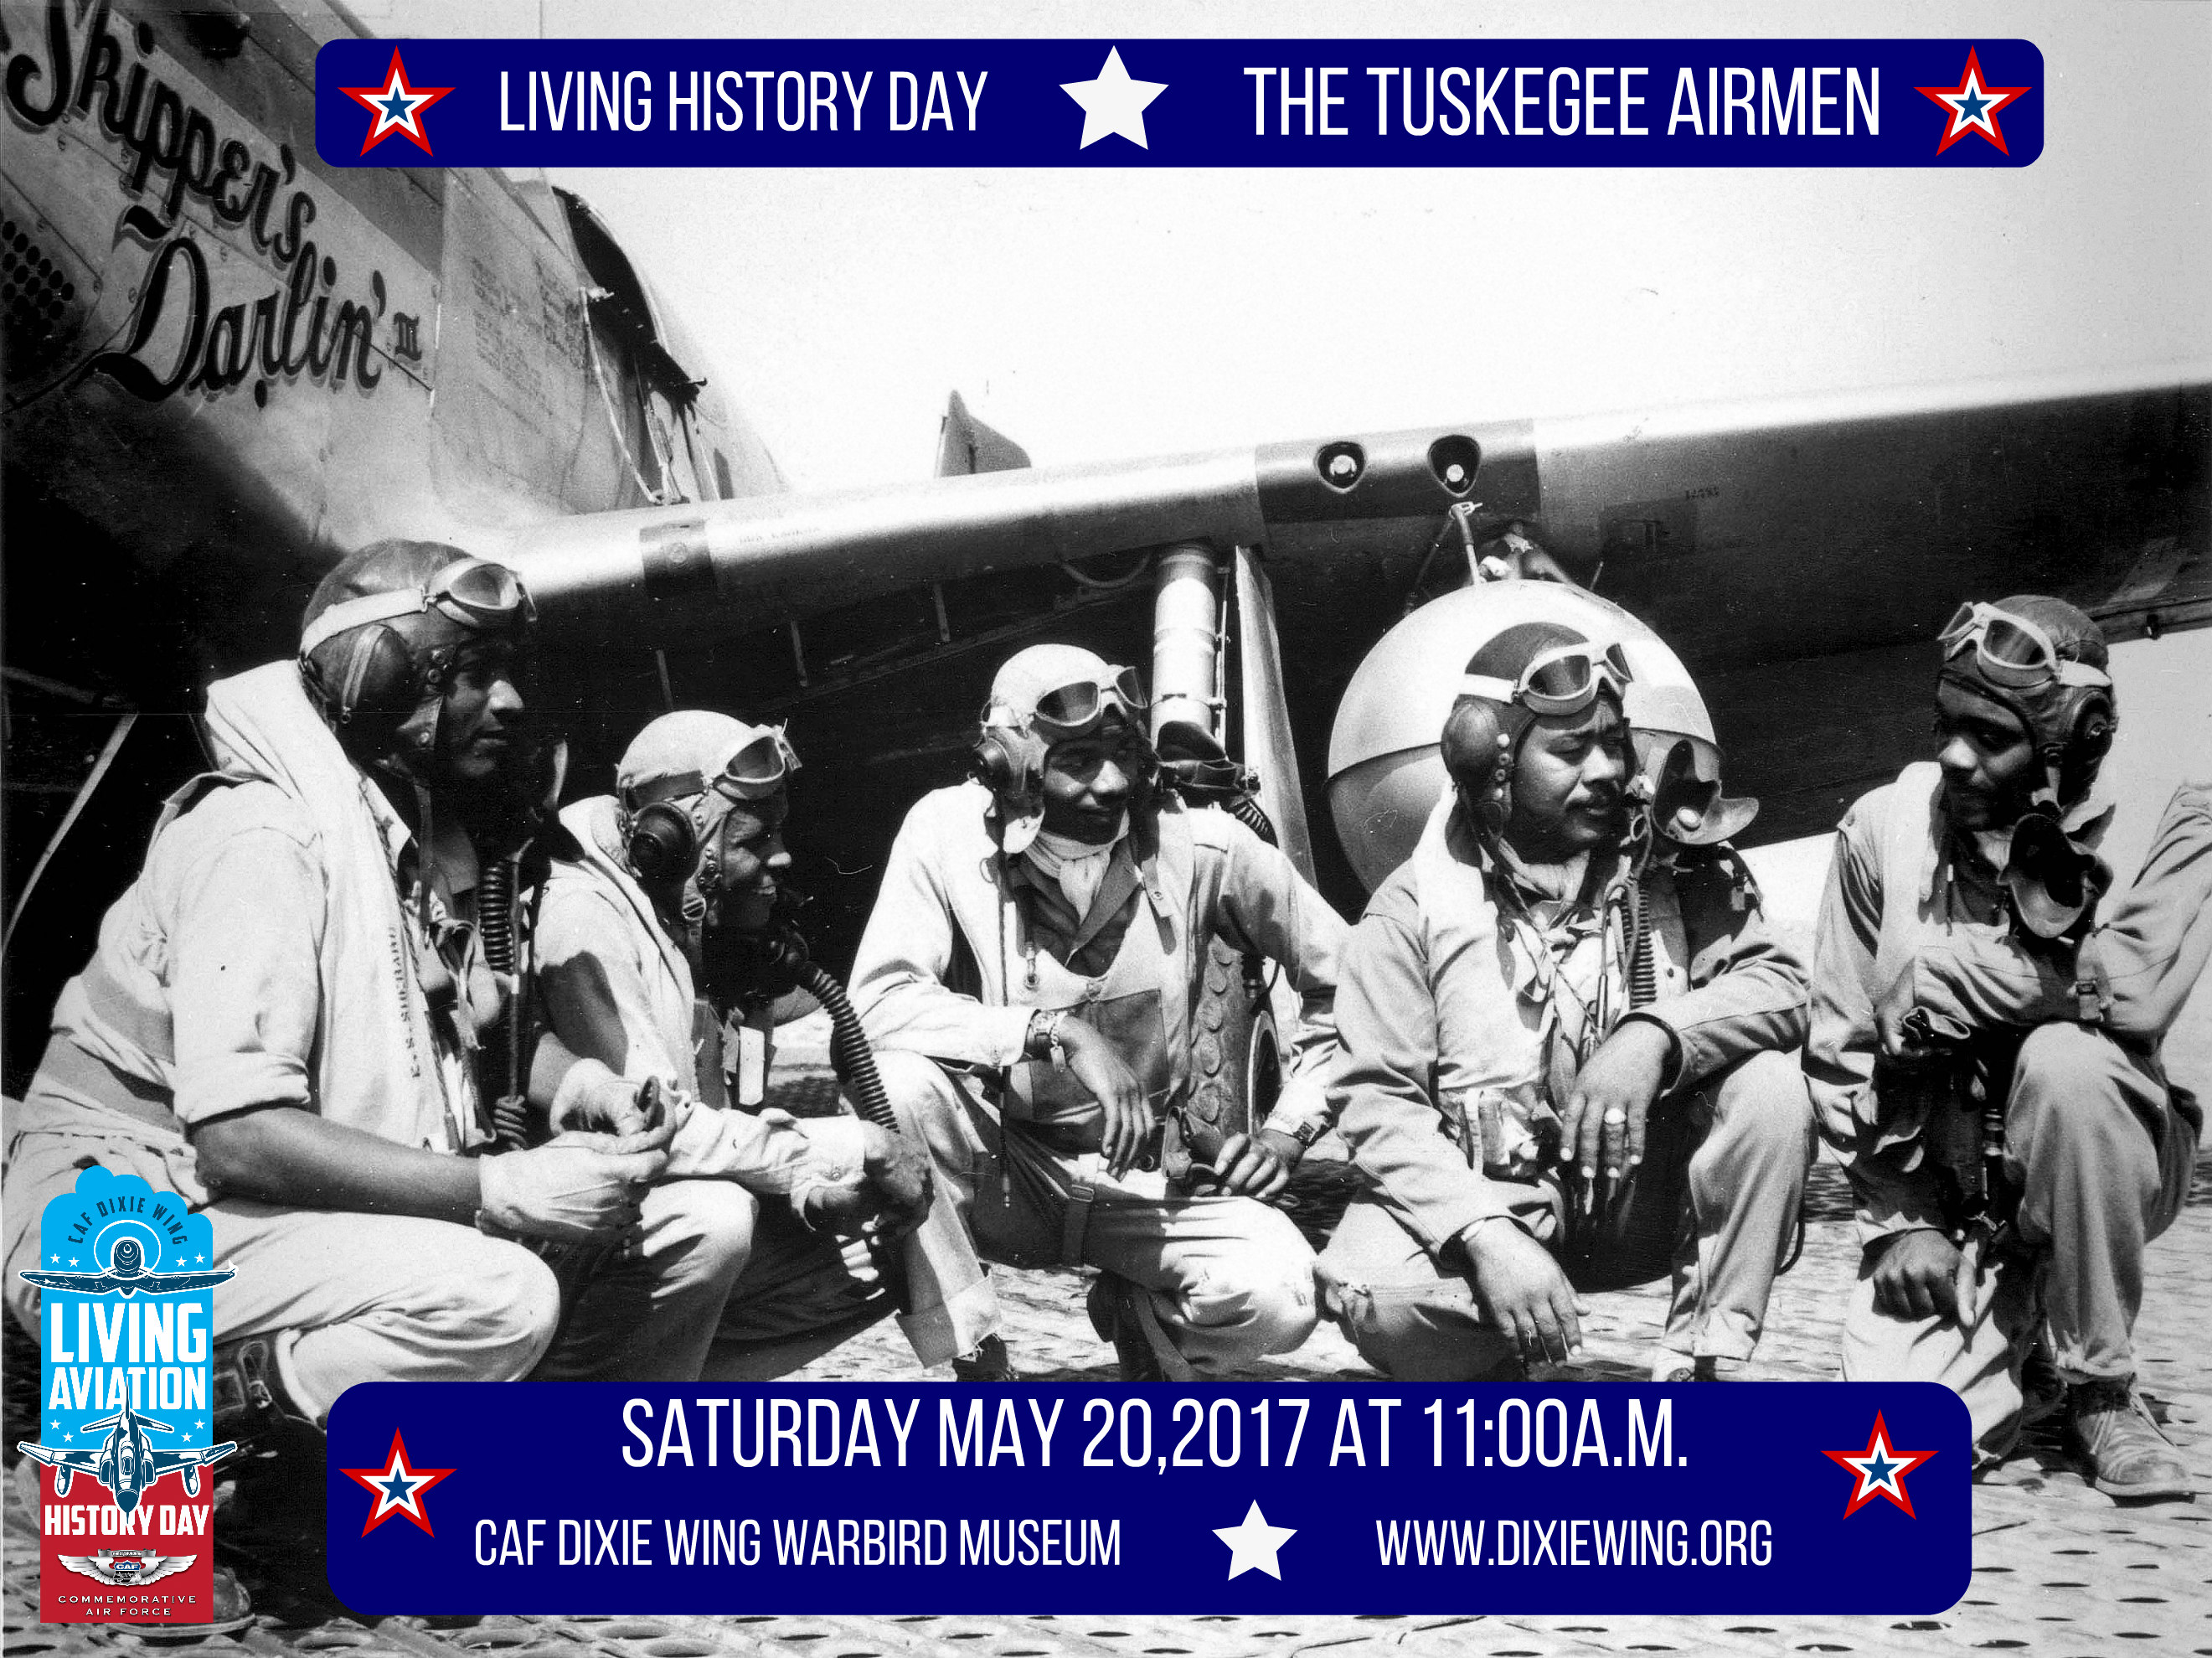 Pilots of the 332nd Fighter Group, "Tuskegee Airmen," the elite, all-African American 332nd Fighter Group at Ramitelli, Italy., from left to right, Lt. Dempsey W. Morgran, Lt. Carroll S. Woods, Lt. Robert H. Nelron, Jr., Capt. Andrew D. Turner, and Lt. Clarence P. Lester. (U.S. Air Force photo)